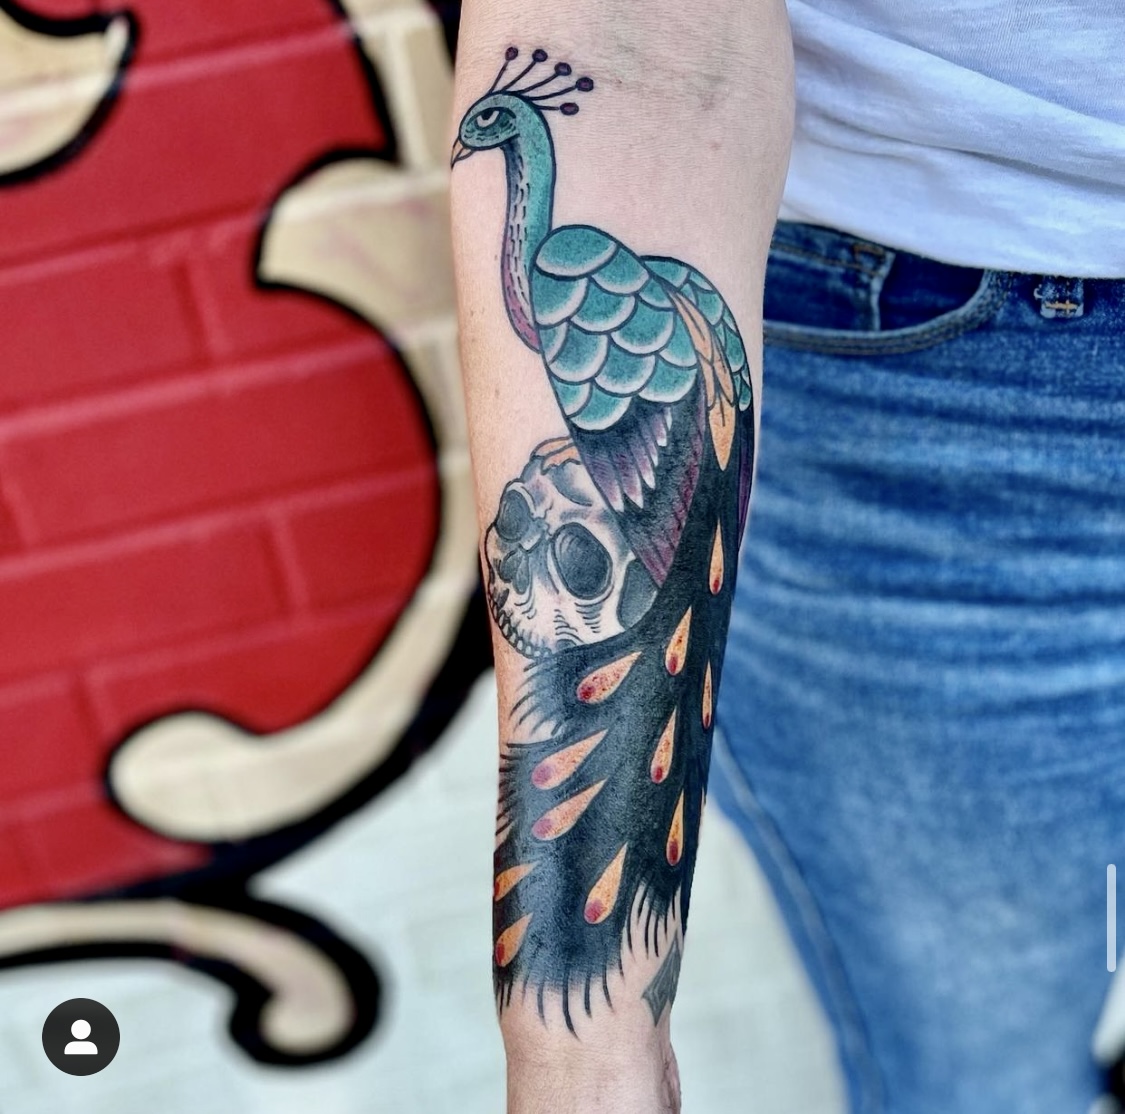 Tattoo of a skull and a peacock from dallas tattoo artists